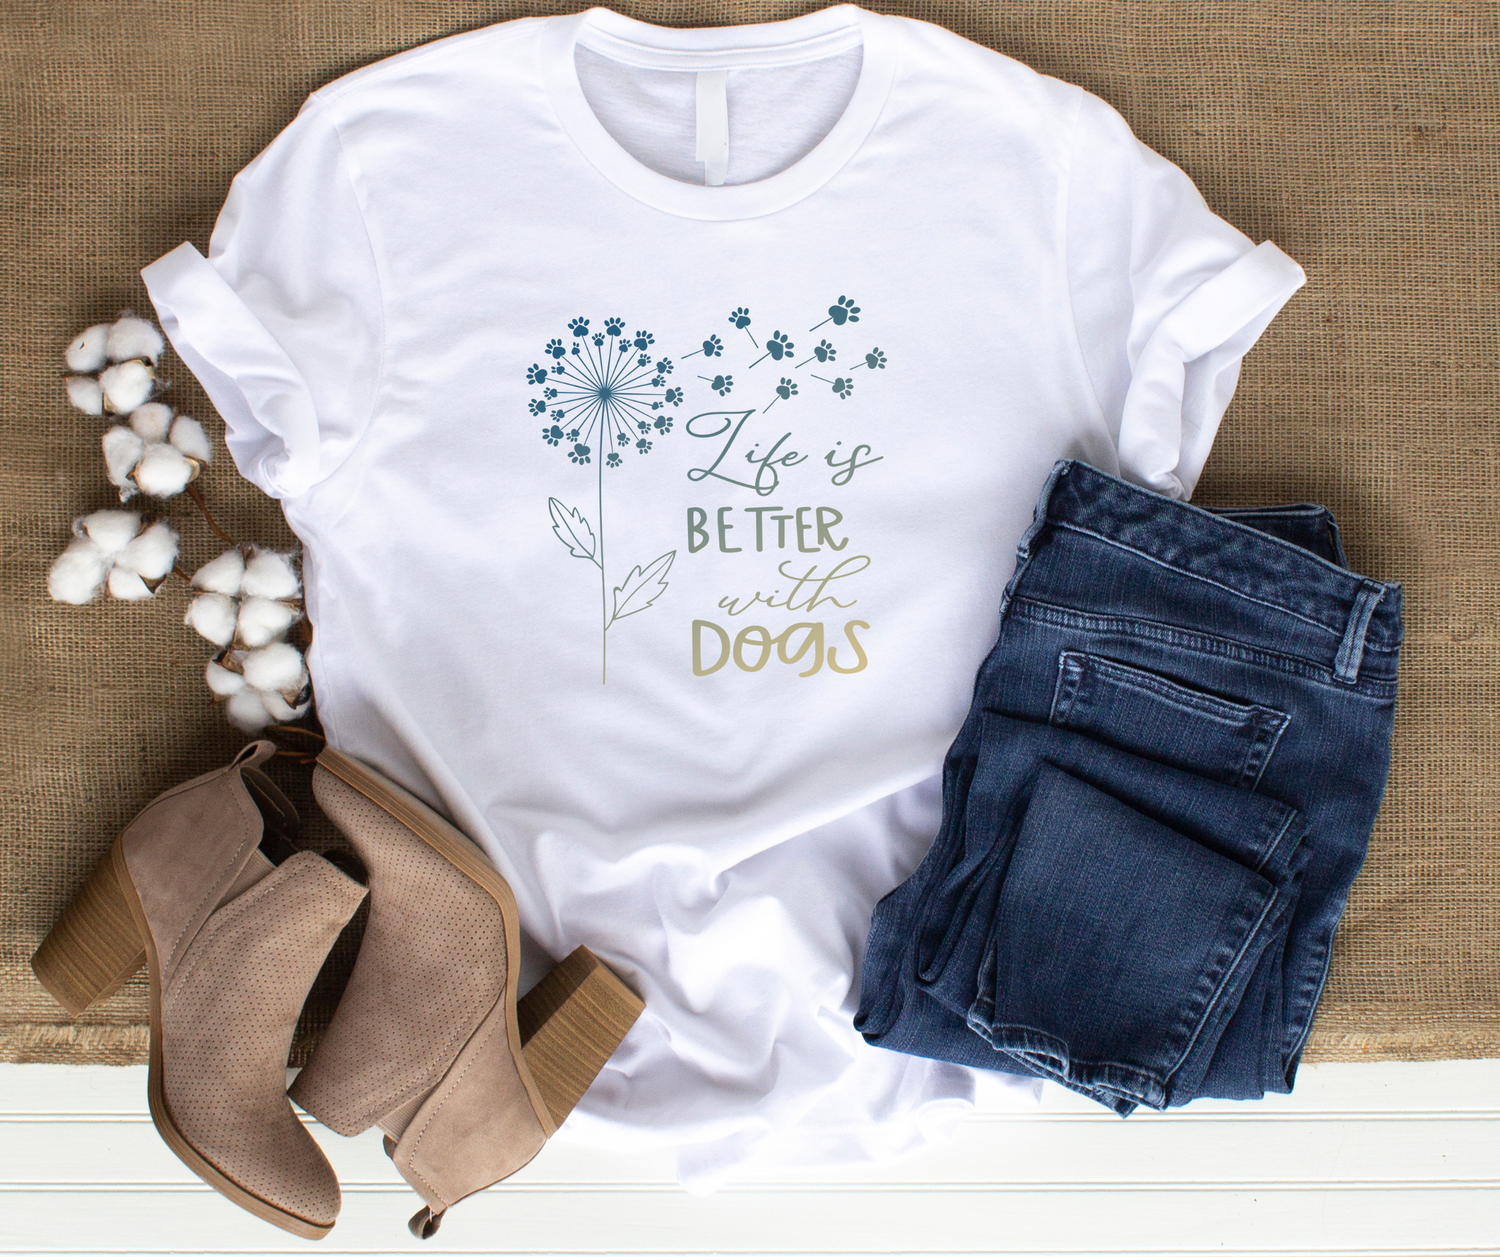 Life is better with dogs t shirt dandelion